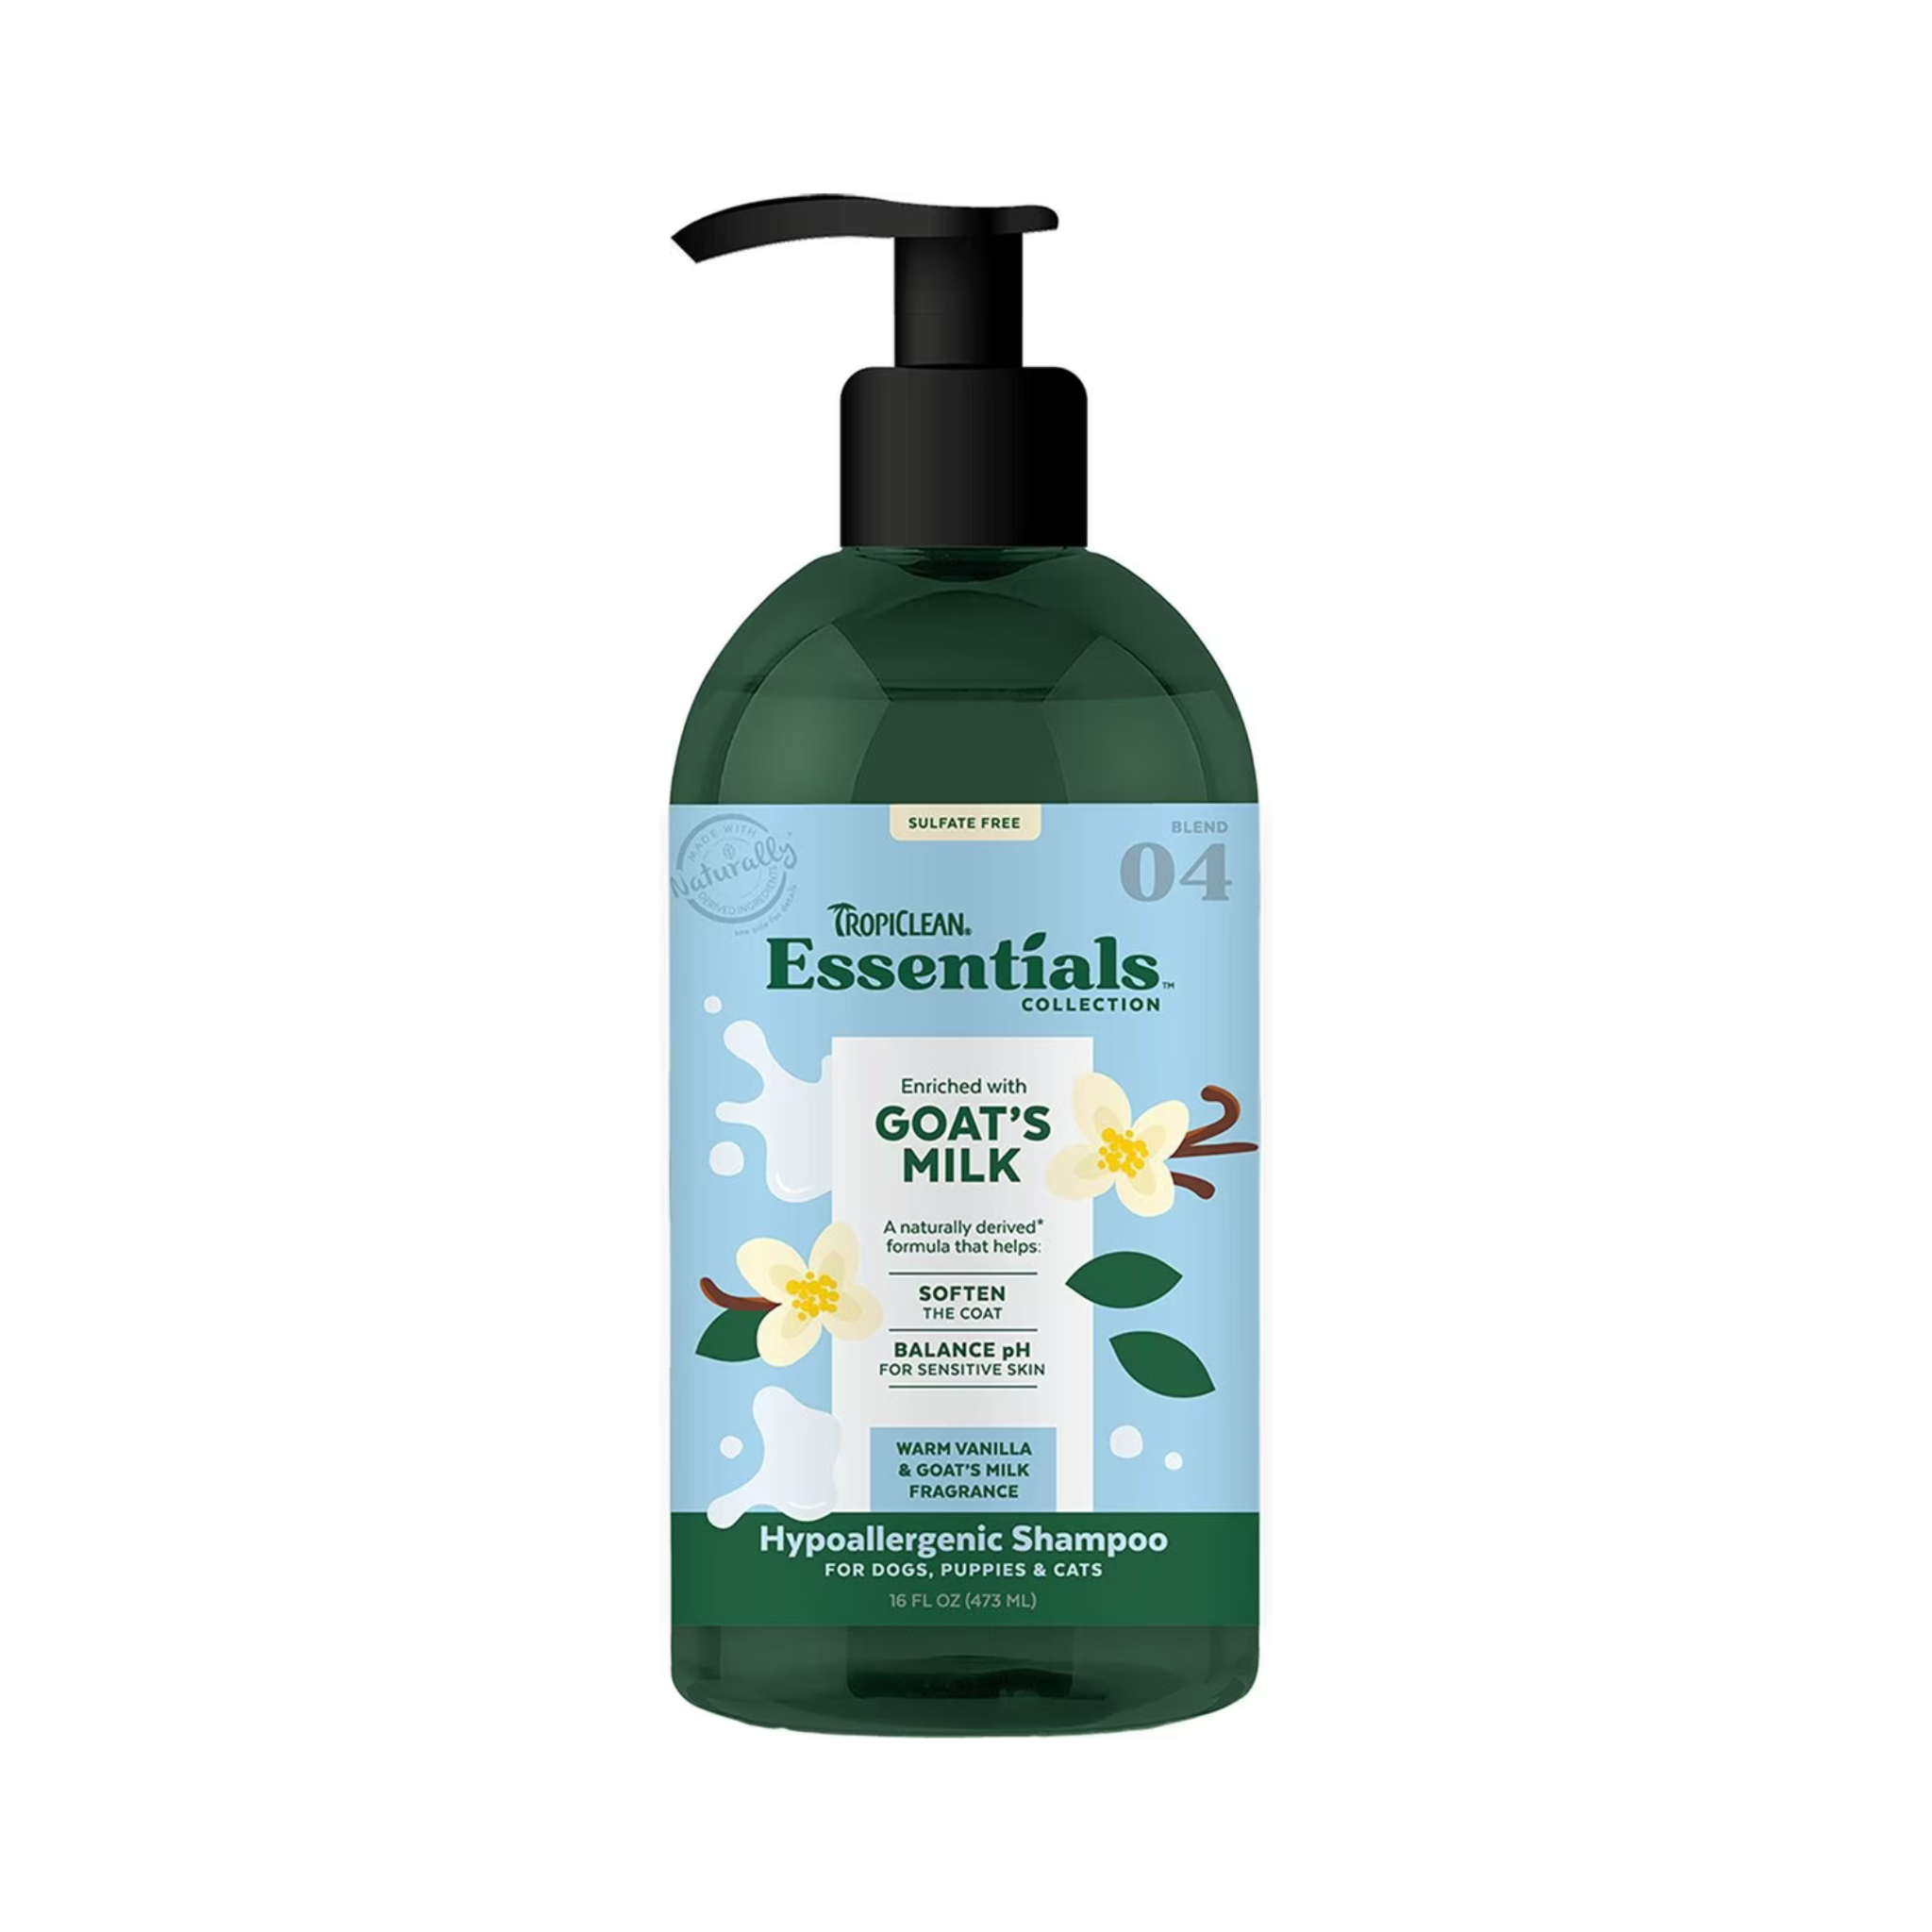 TropiClean Essentials Goat's Milk Shampoo for Dogs, Puppies & Cats